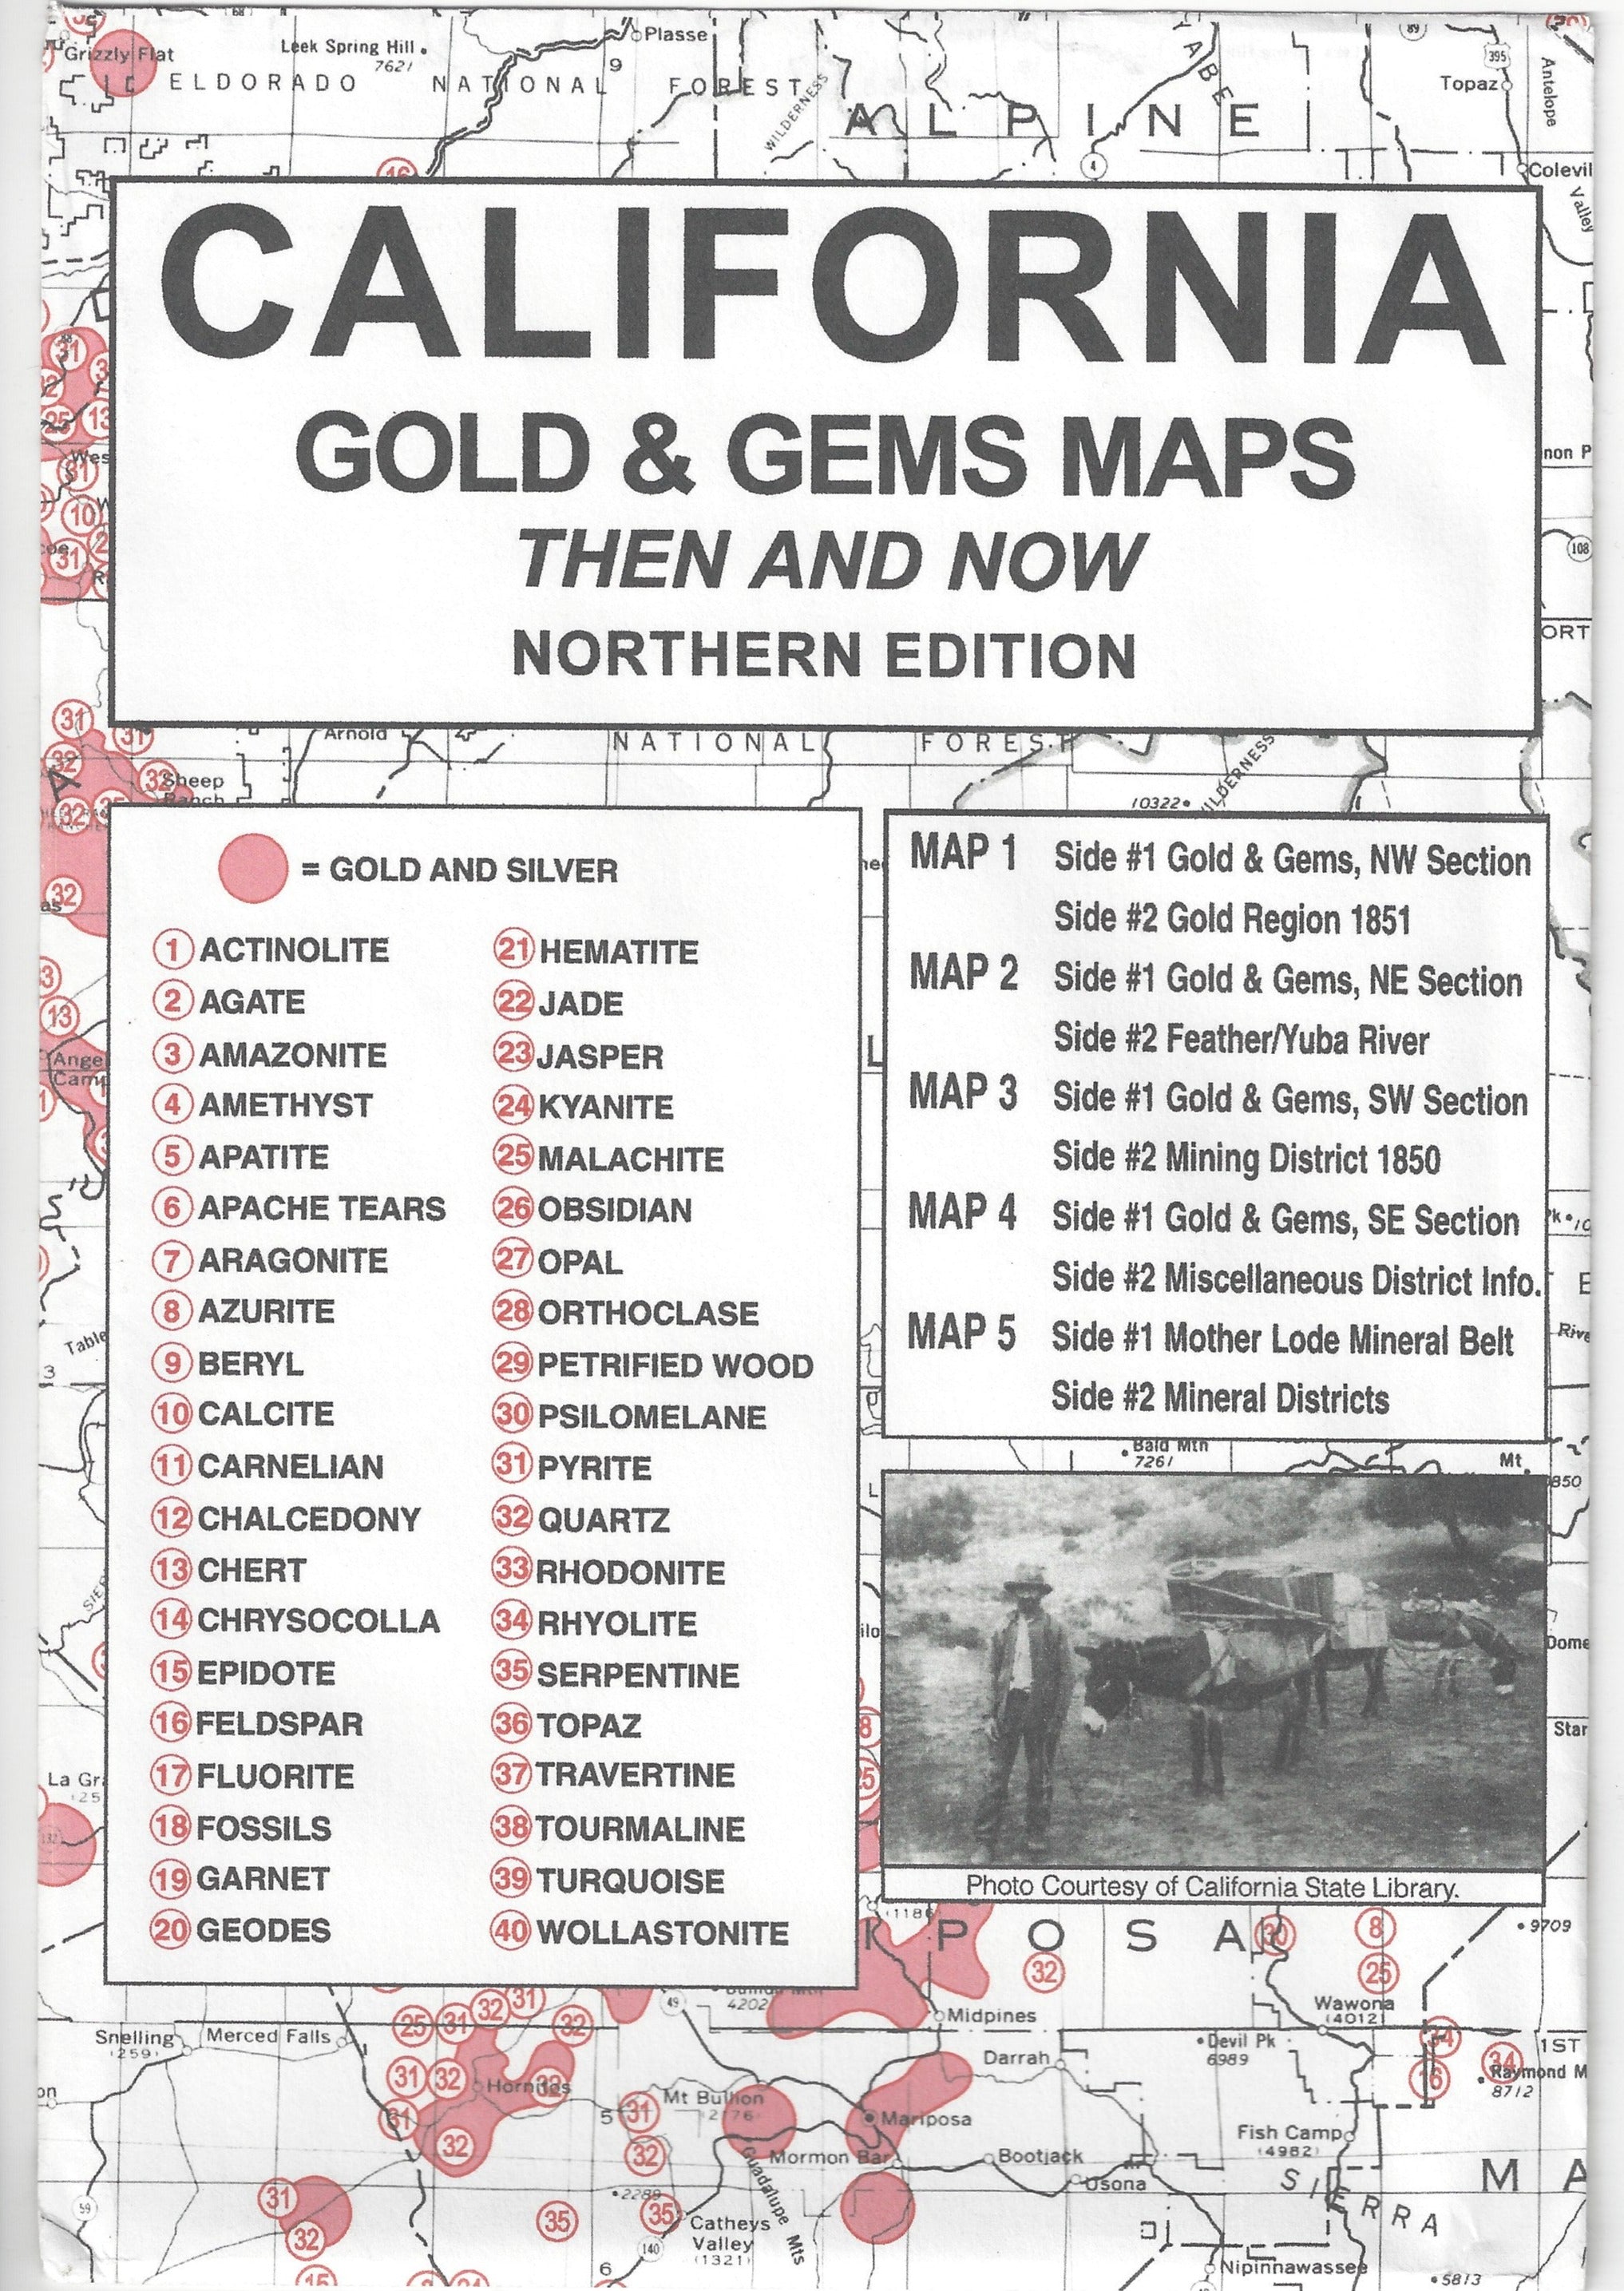 Northern California Gold and Gems Maps: Then and Now